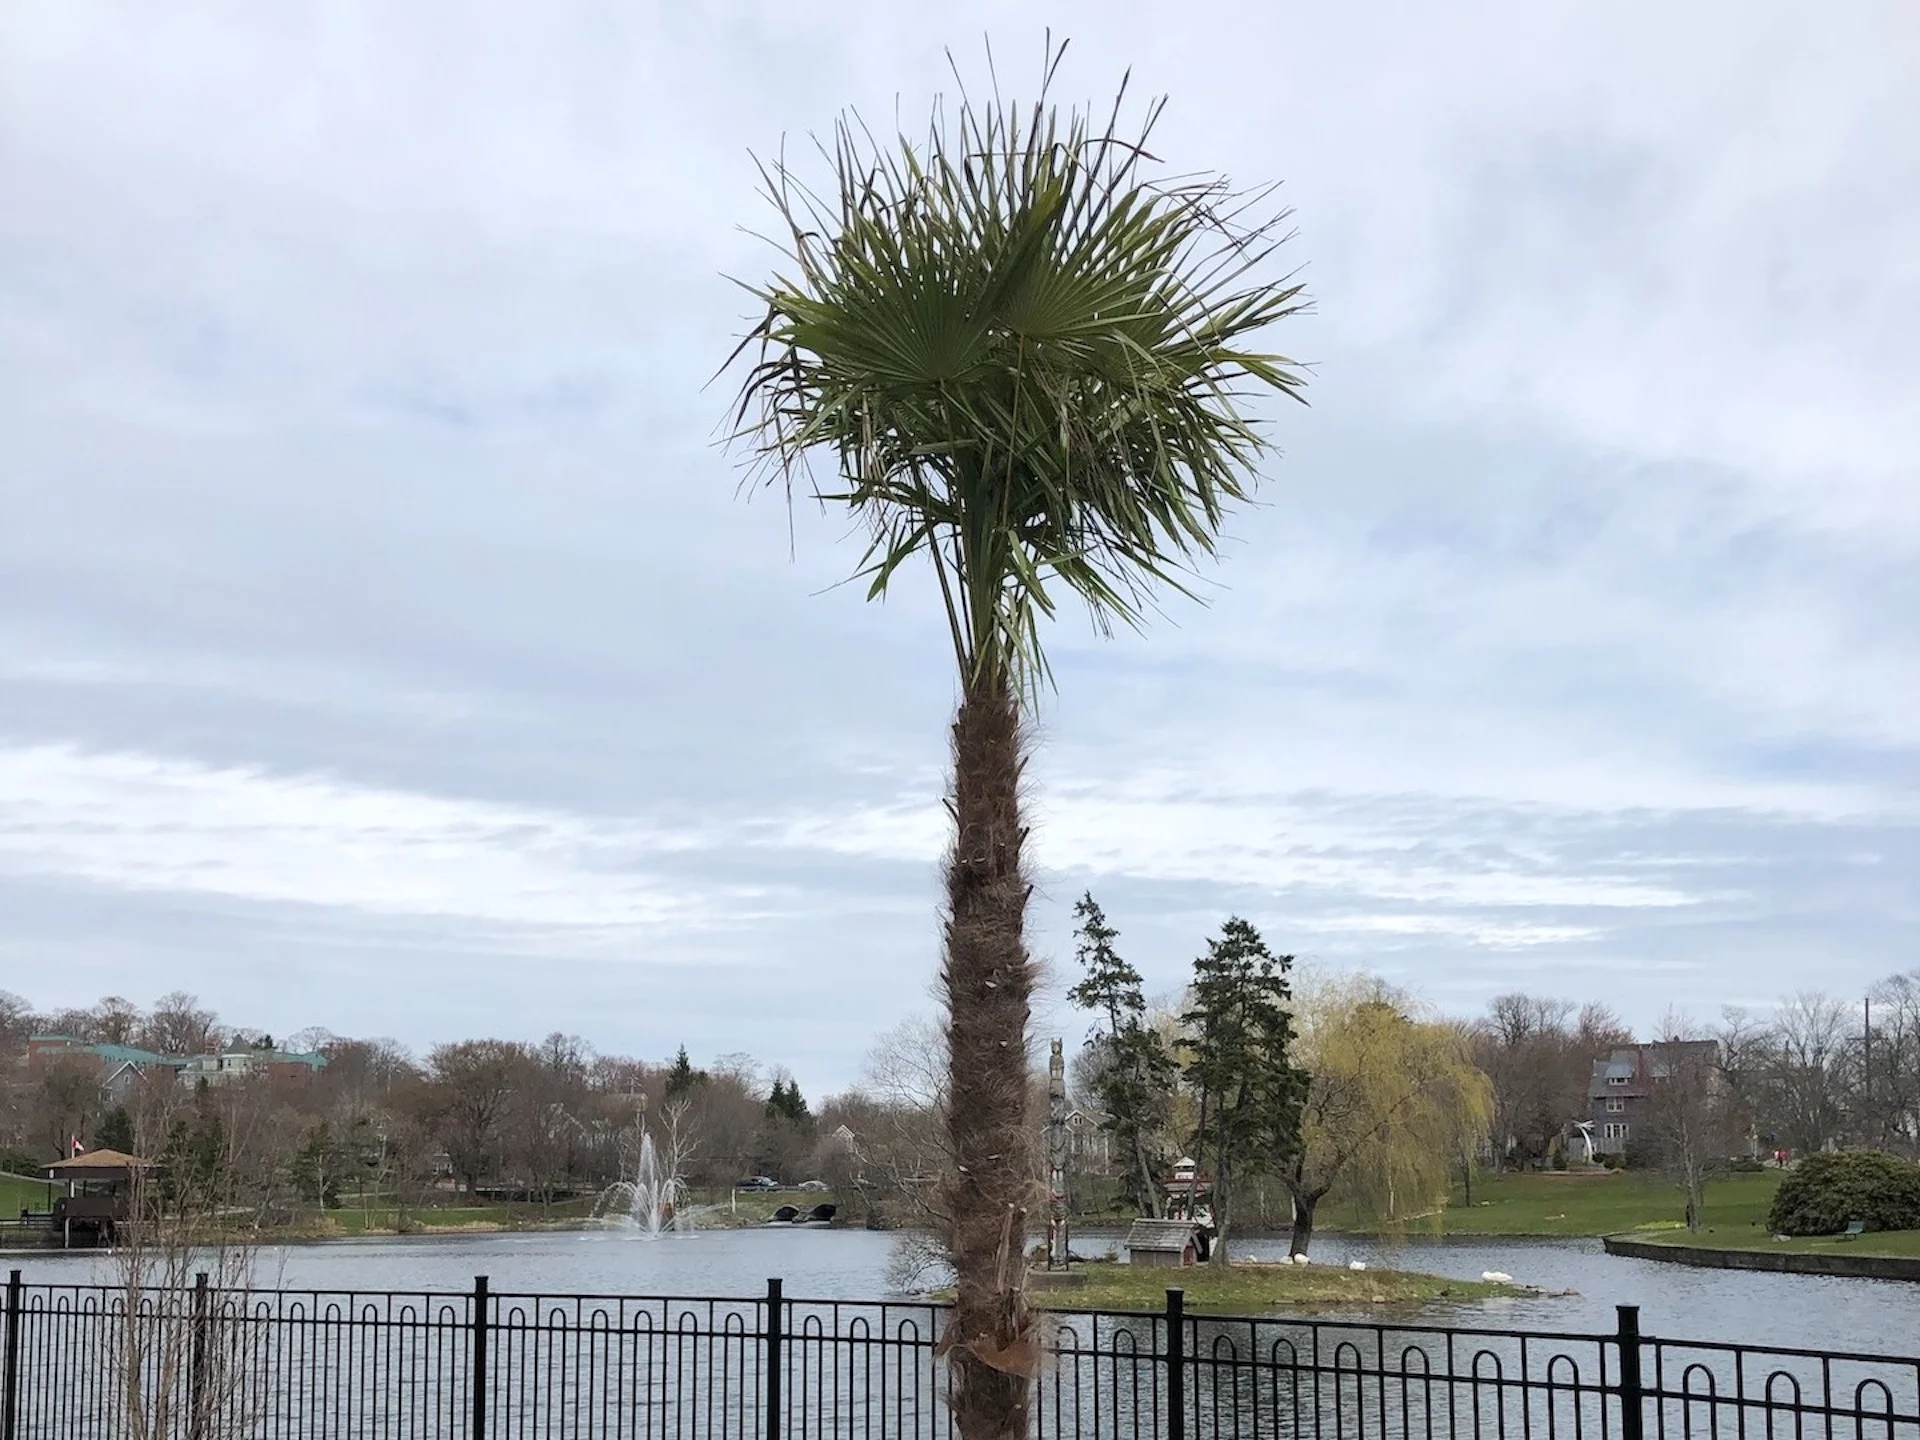 Paradise lost: The fate of Nova Scotia’s final palm trees revealed